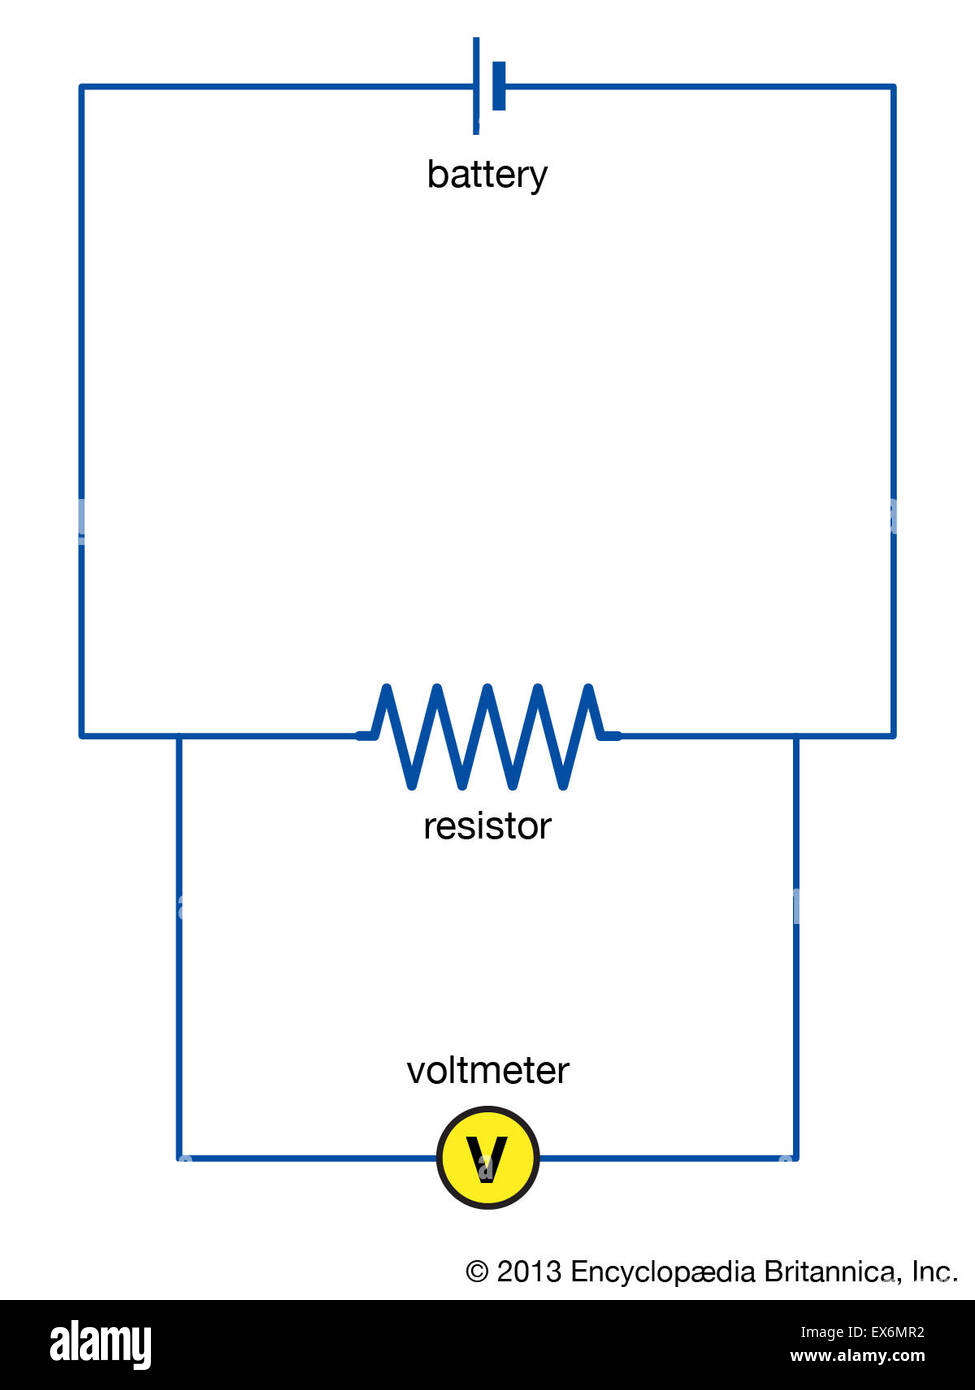 simple electronics circuit projects